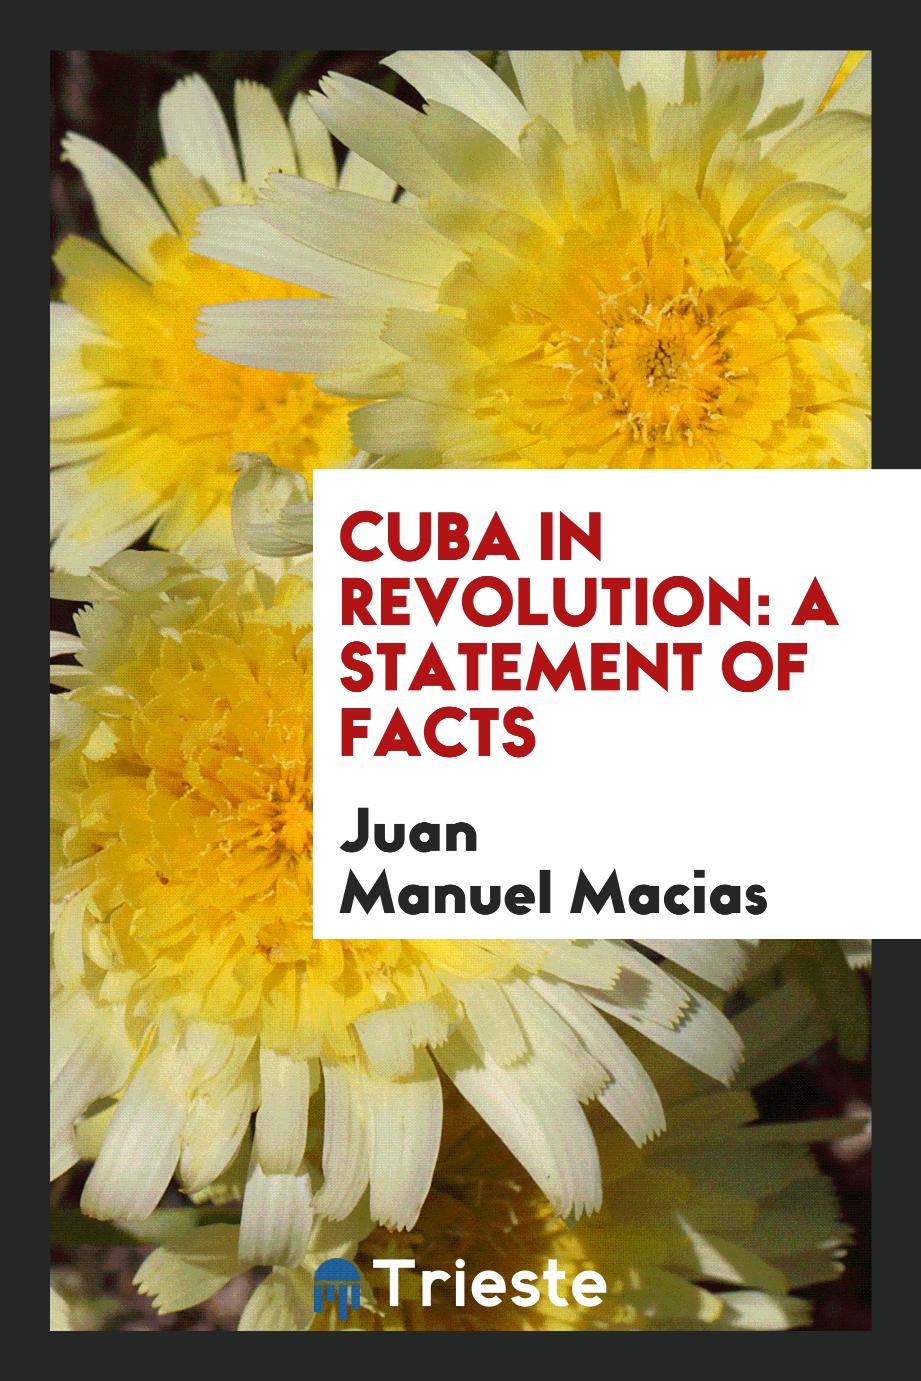 Cuba in Revolution: A Statement of Facts